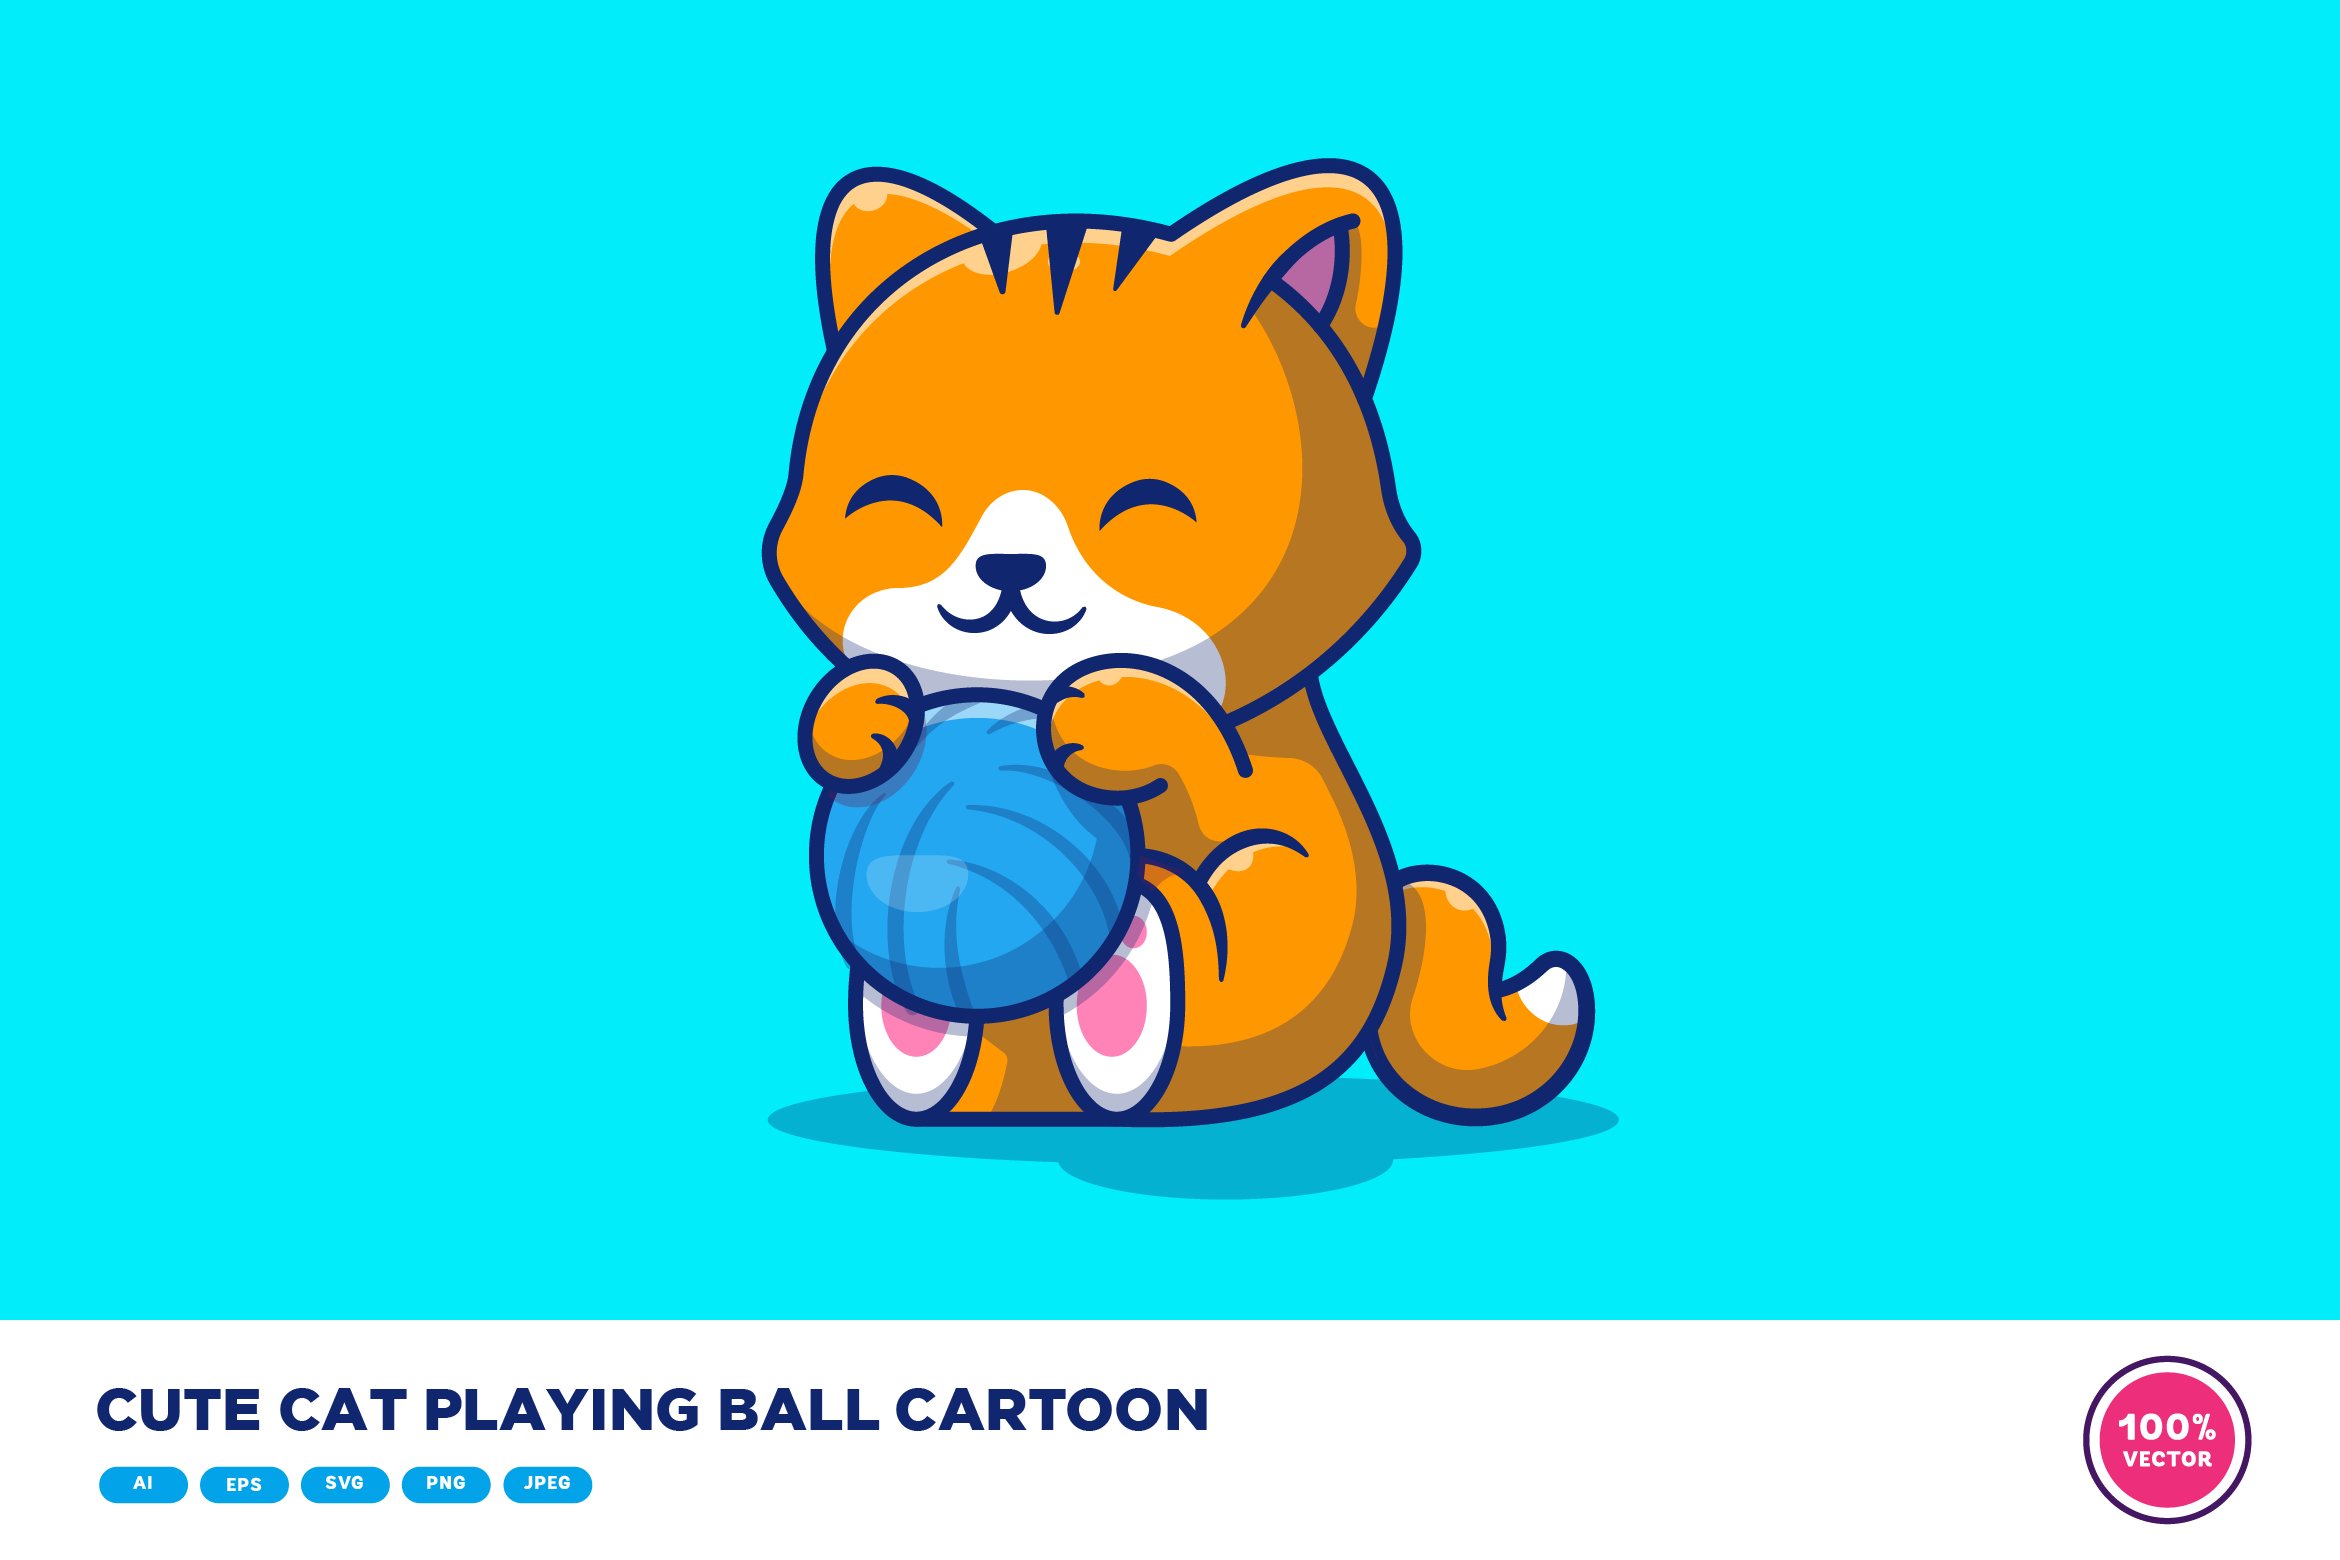 Cute Cat Playing Ball Cartoon cover image.